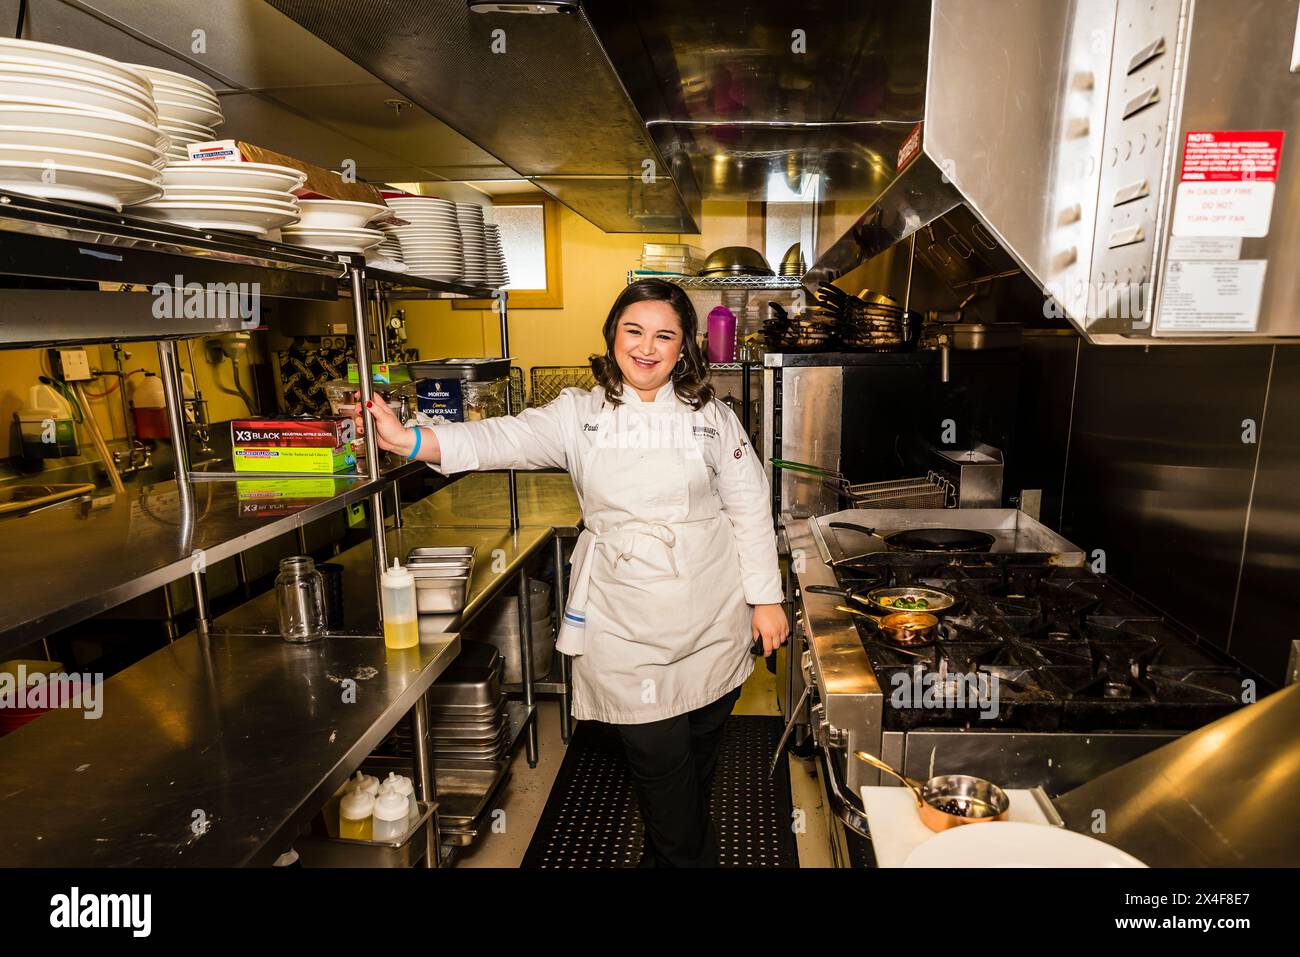 USA, Washington State, Richland. Chef Pauline Garza, Drumheller's Food & Drink. (Editorial Use Only) Stock Photo